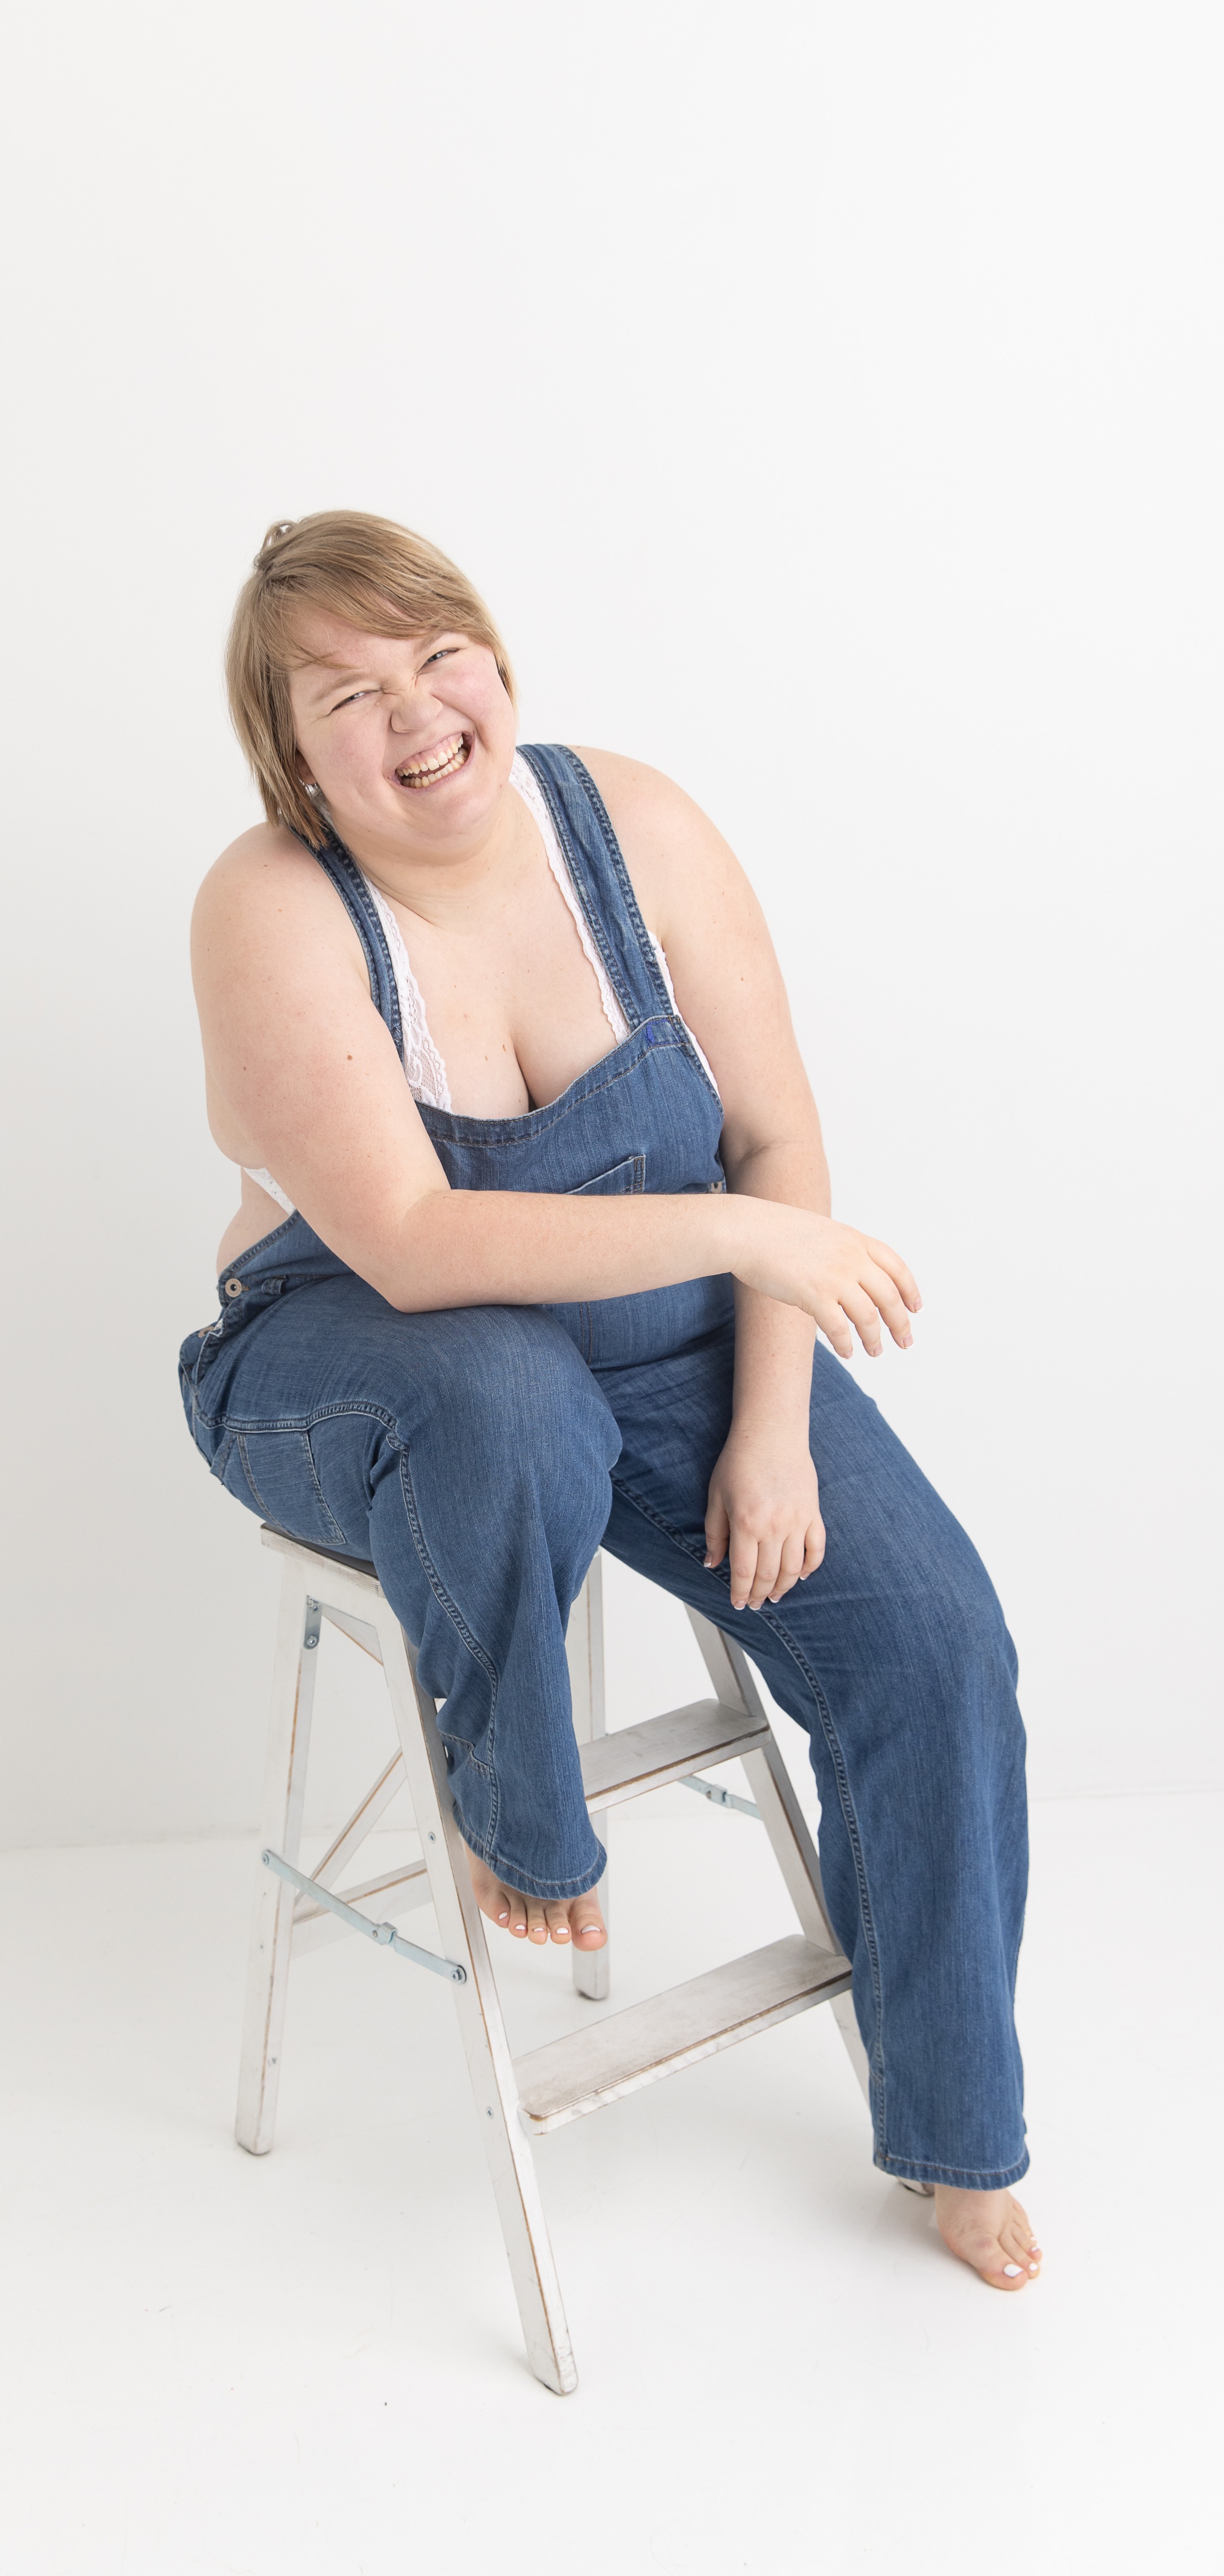 Kami wearing blue overalls sitting on a step stool